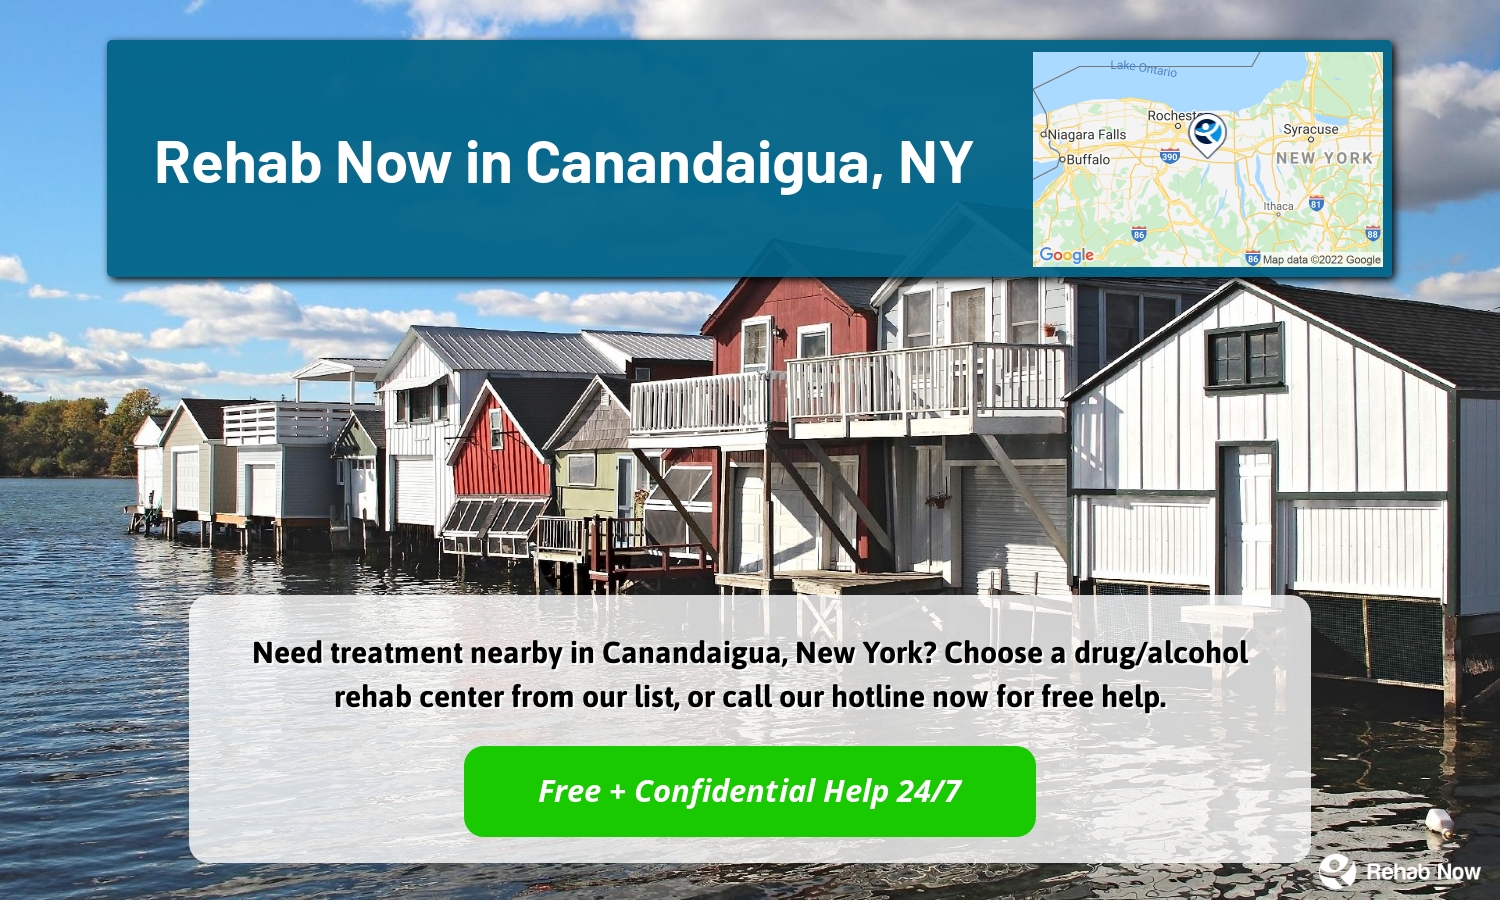 Need treatment nearby in Canandaigua, New York? Choose a drug/alcohol rehab center from our list, or call our hotline now for free help.